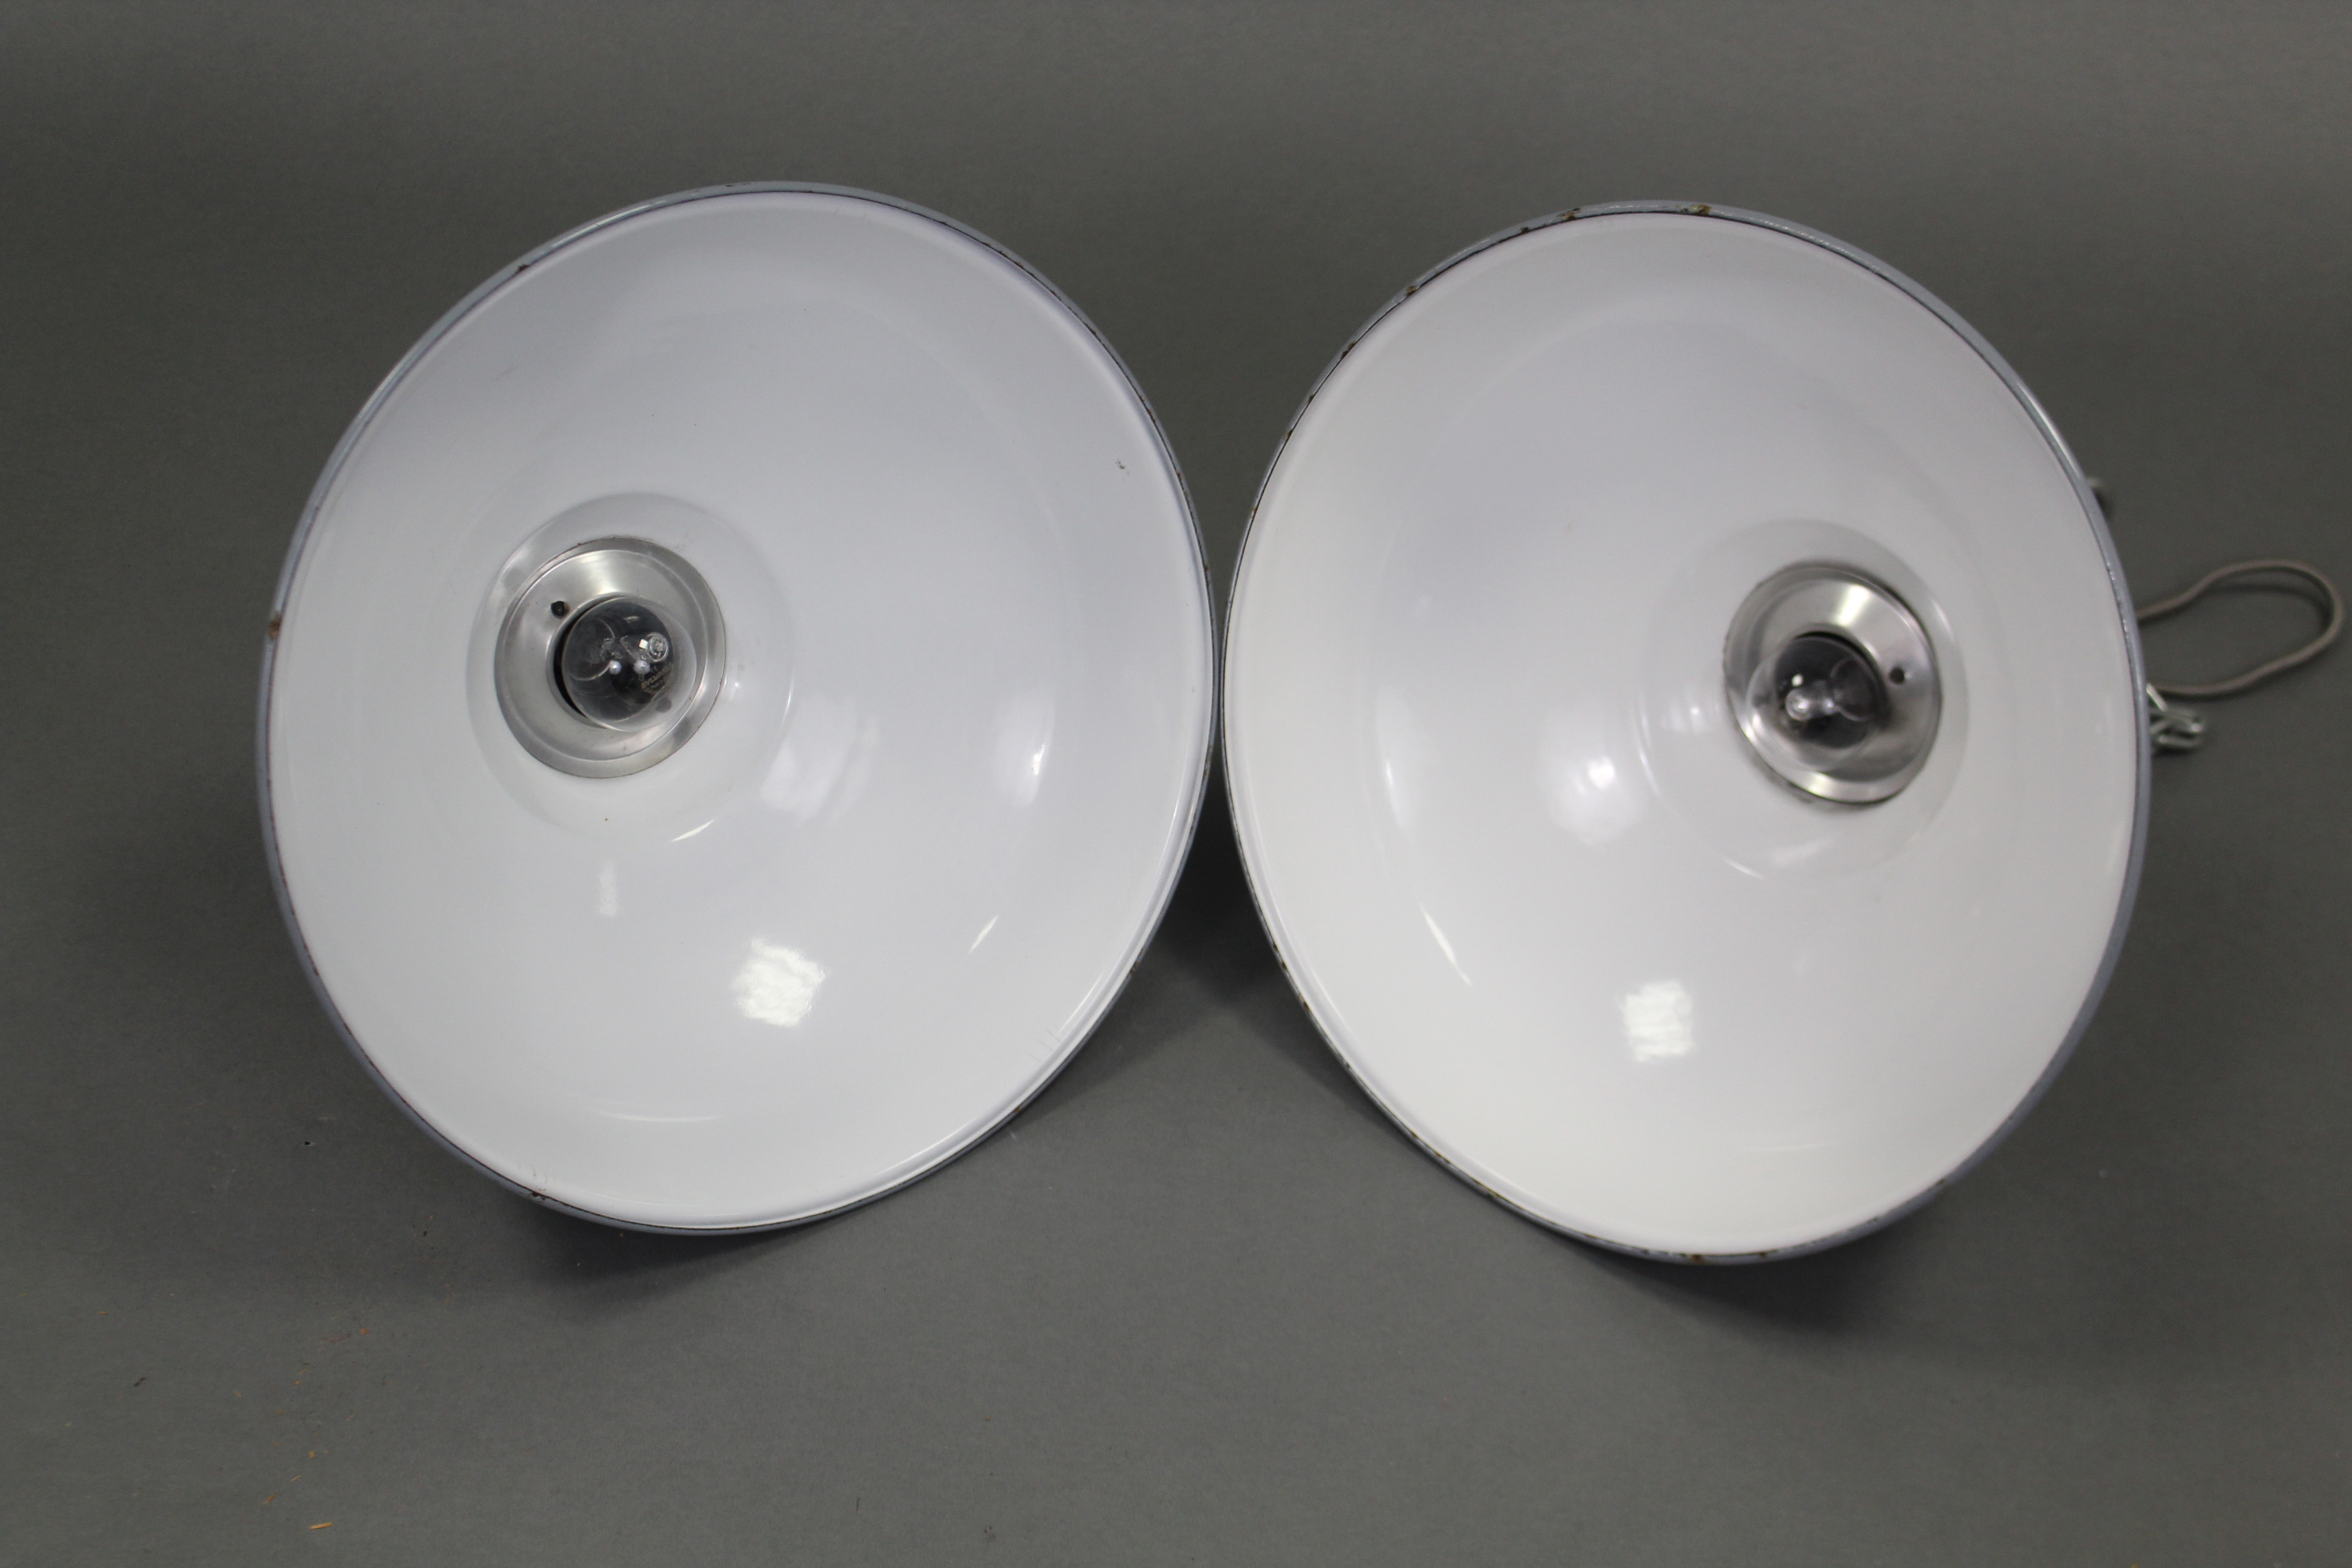 A pair of mid-20th century Benjamin industrial pendant ceiling lights with blue/grey enamel - Image 7 of 7